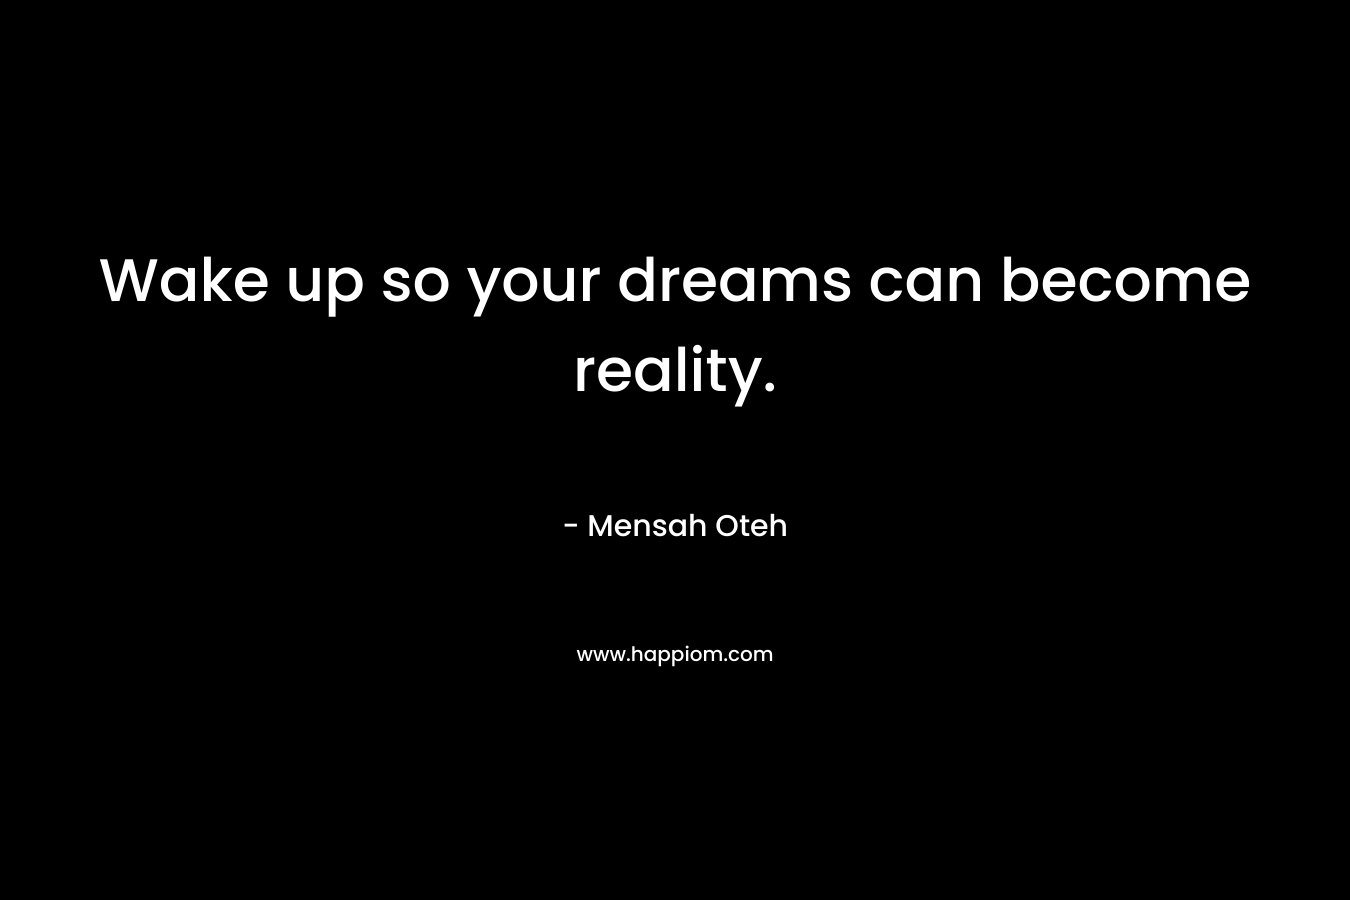 Wake up so your dreams can become reality.